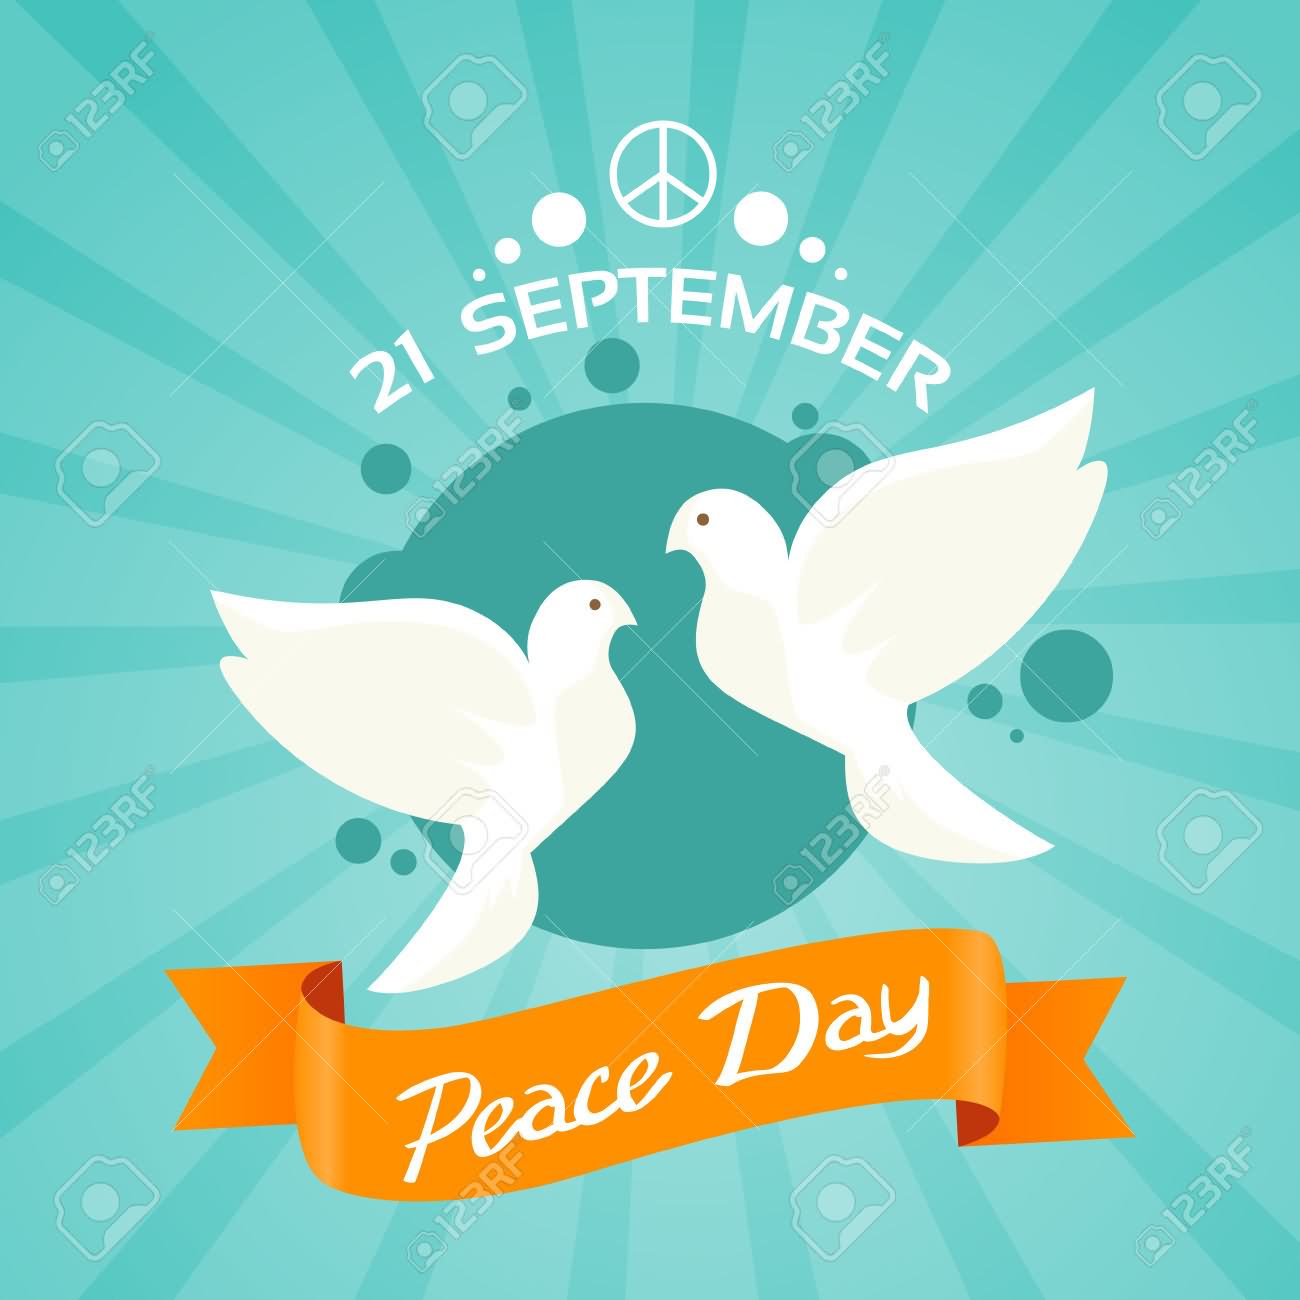 21 September Peace Day Poster Image